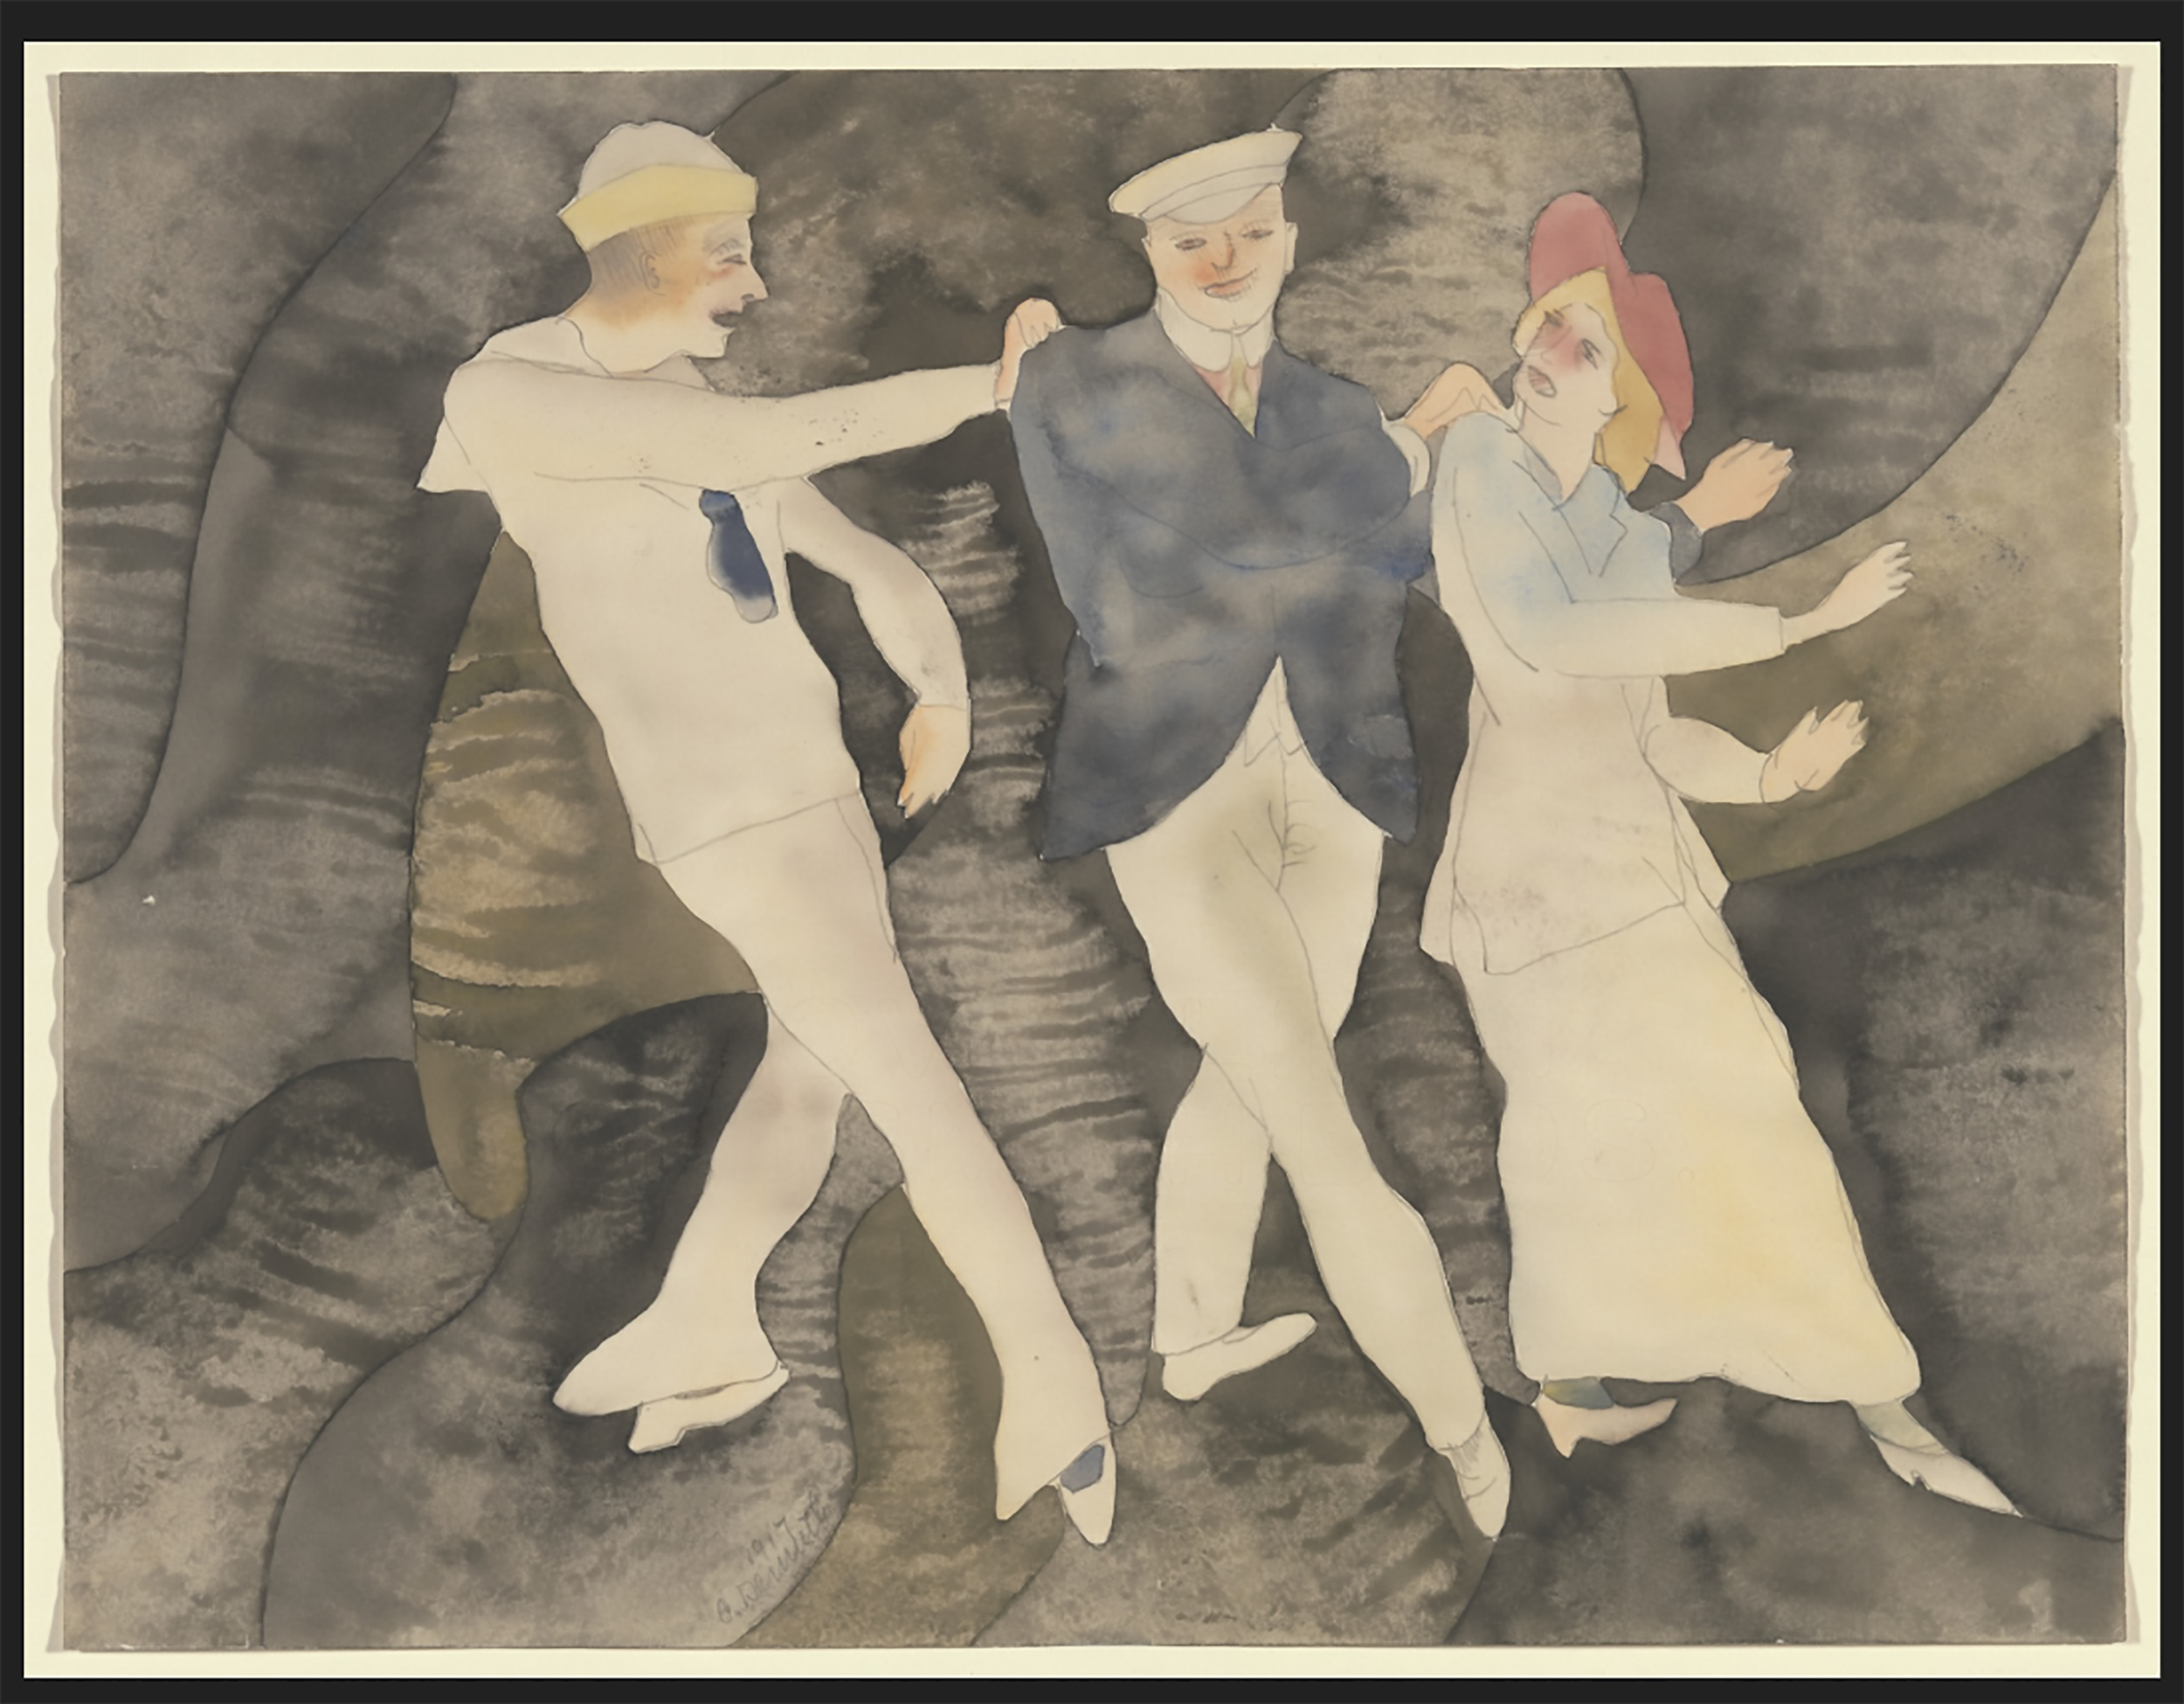  Charles Demuth, Vaudeville, 1917, Collection of the Museum of Modern Art, New York, Katharine Cornell Fund 